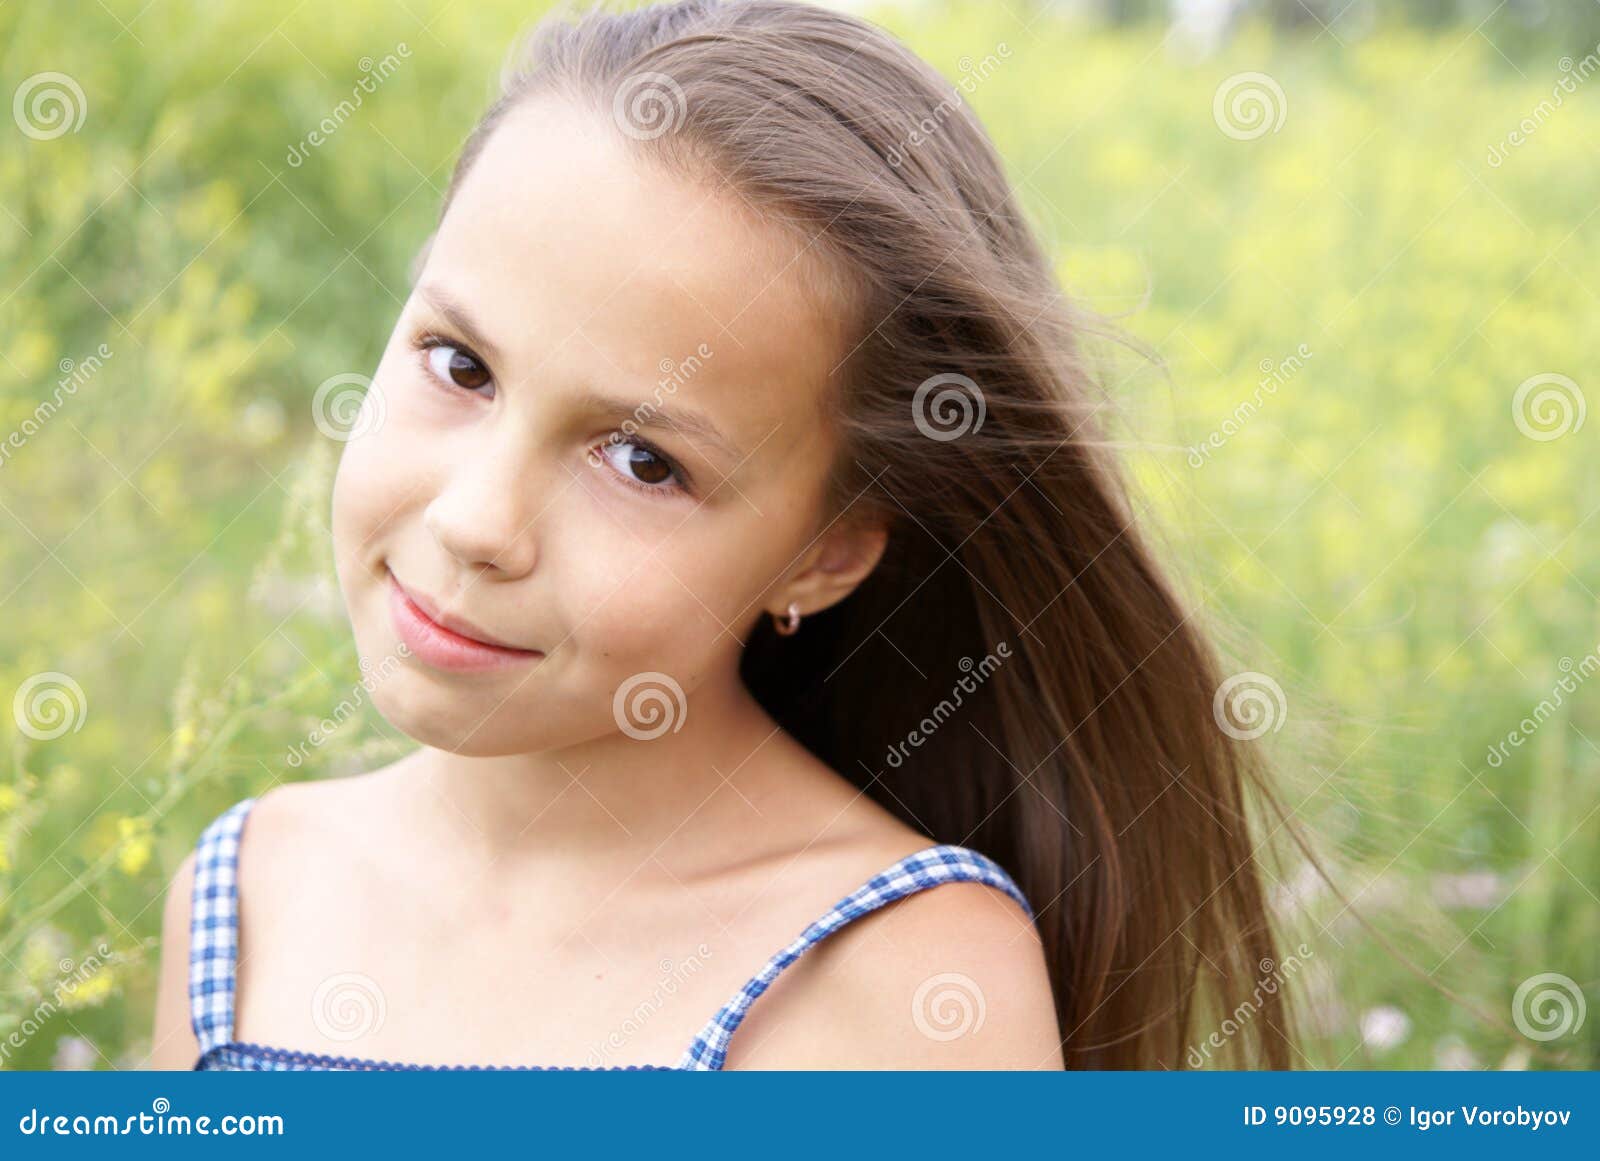 Preteen Girl On Grass Background Royalty Free Stock Image 